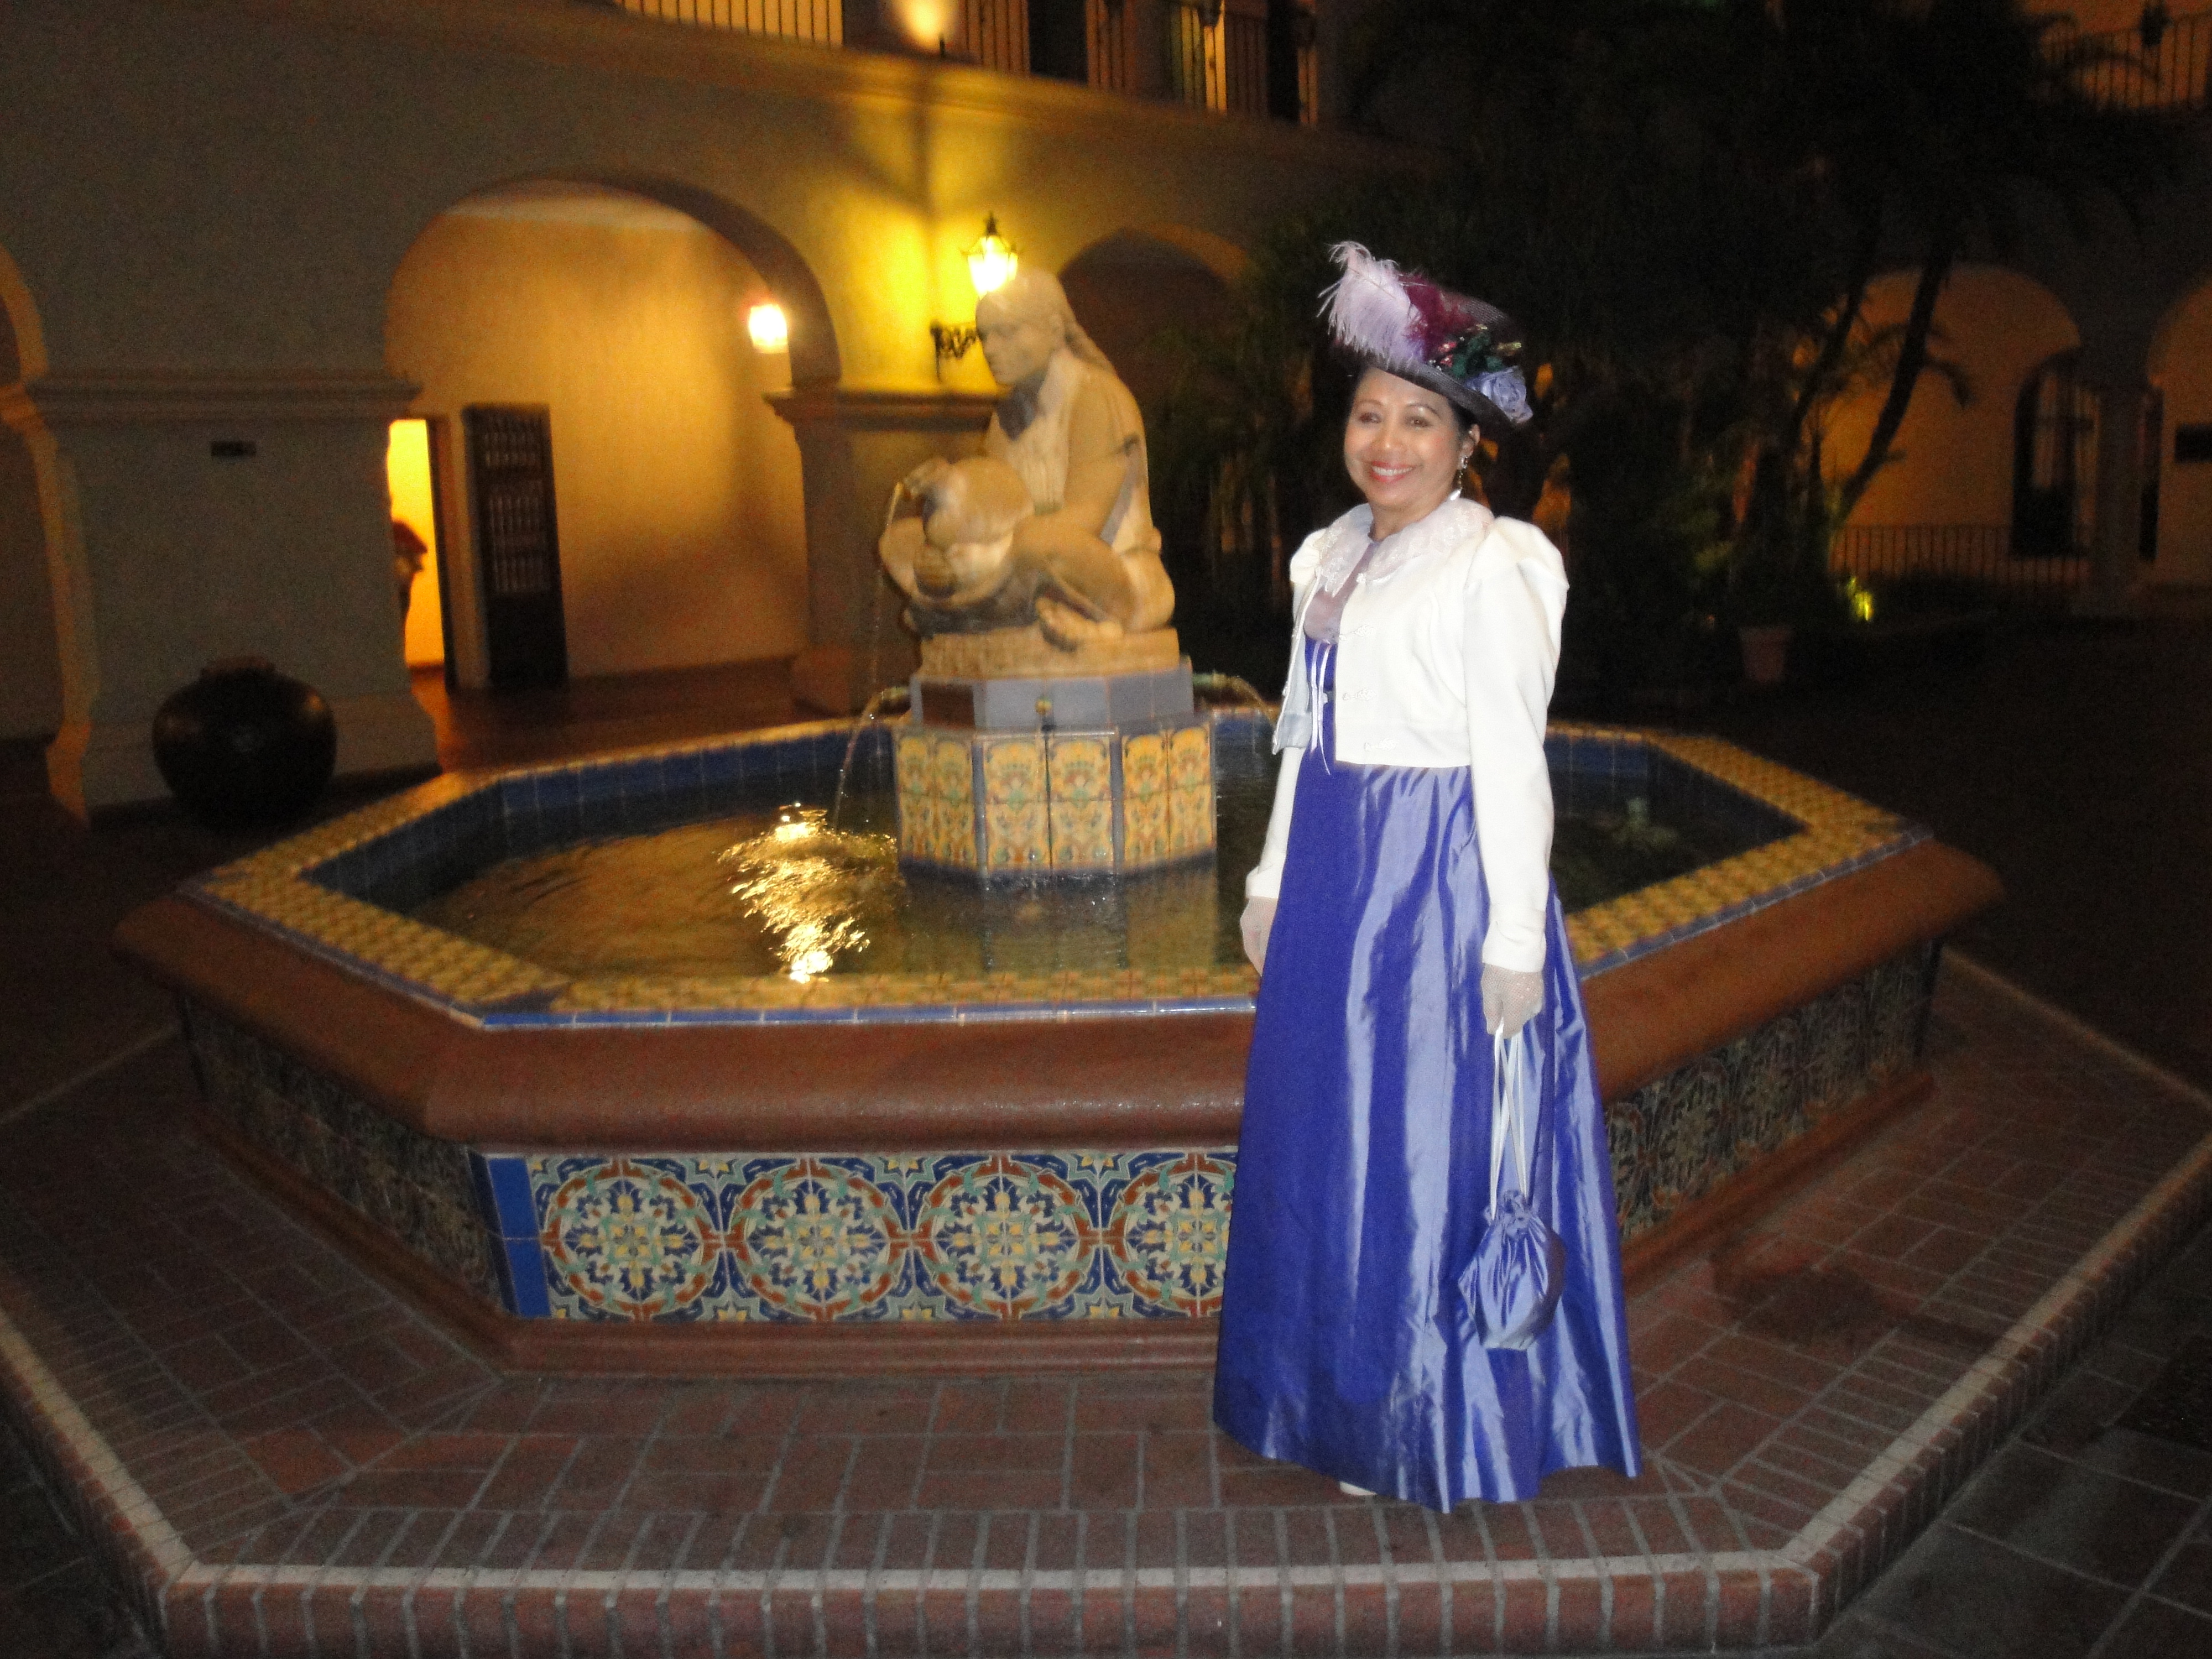 WORA WITH REGENCY GROUP AT BALBOA PARK